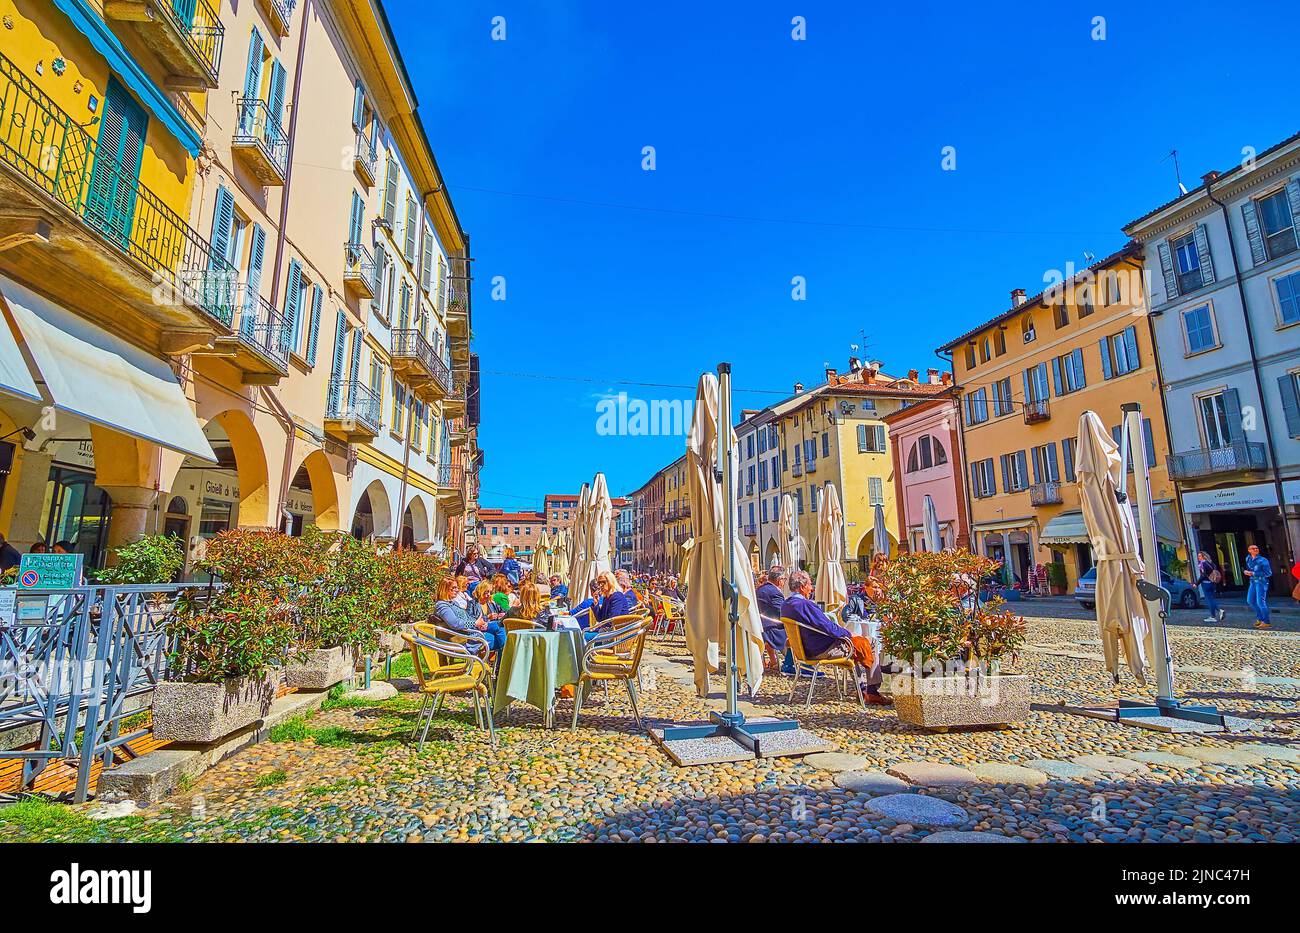 PAVIA, ITALY - APRIL 9, 2022: Outdoor tabbles of the restaurants on Piazza della Vittoria, on April 9 in Pavia, Italy Stock Photo